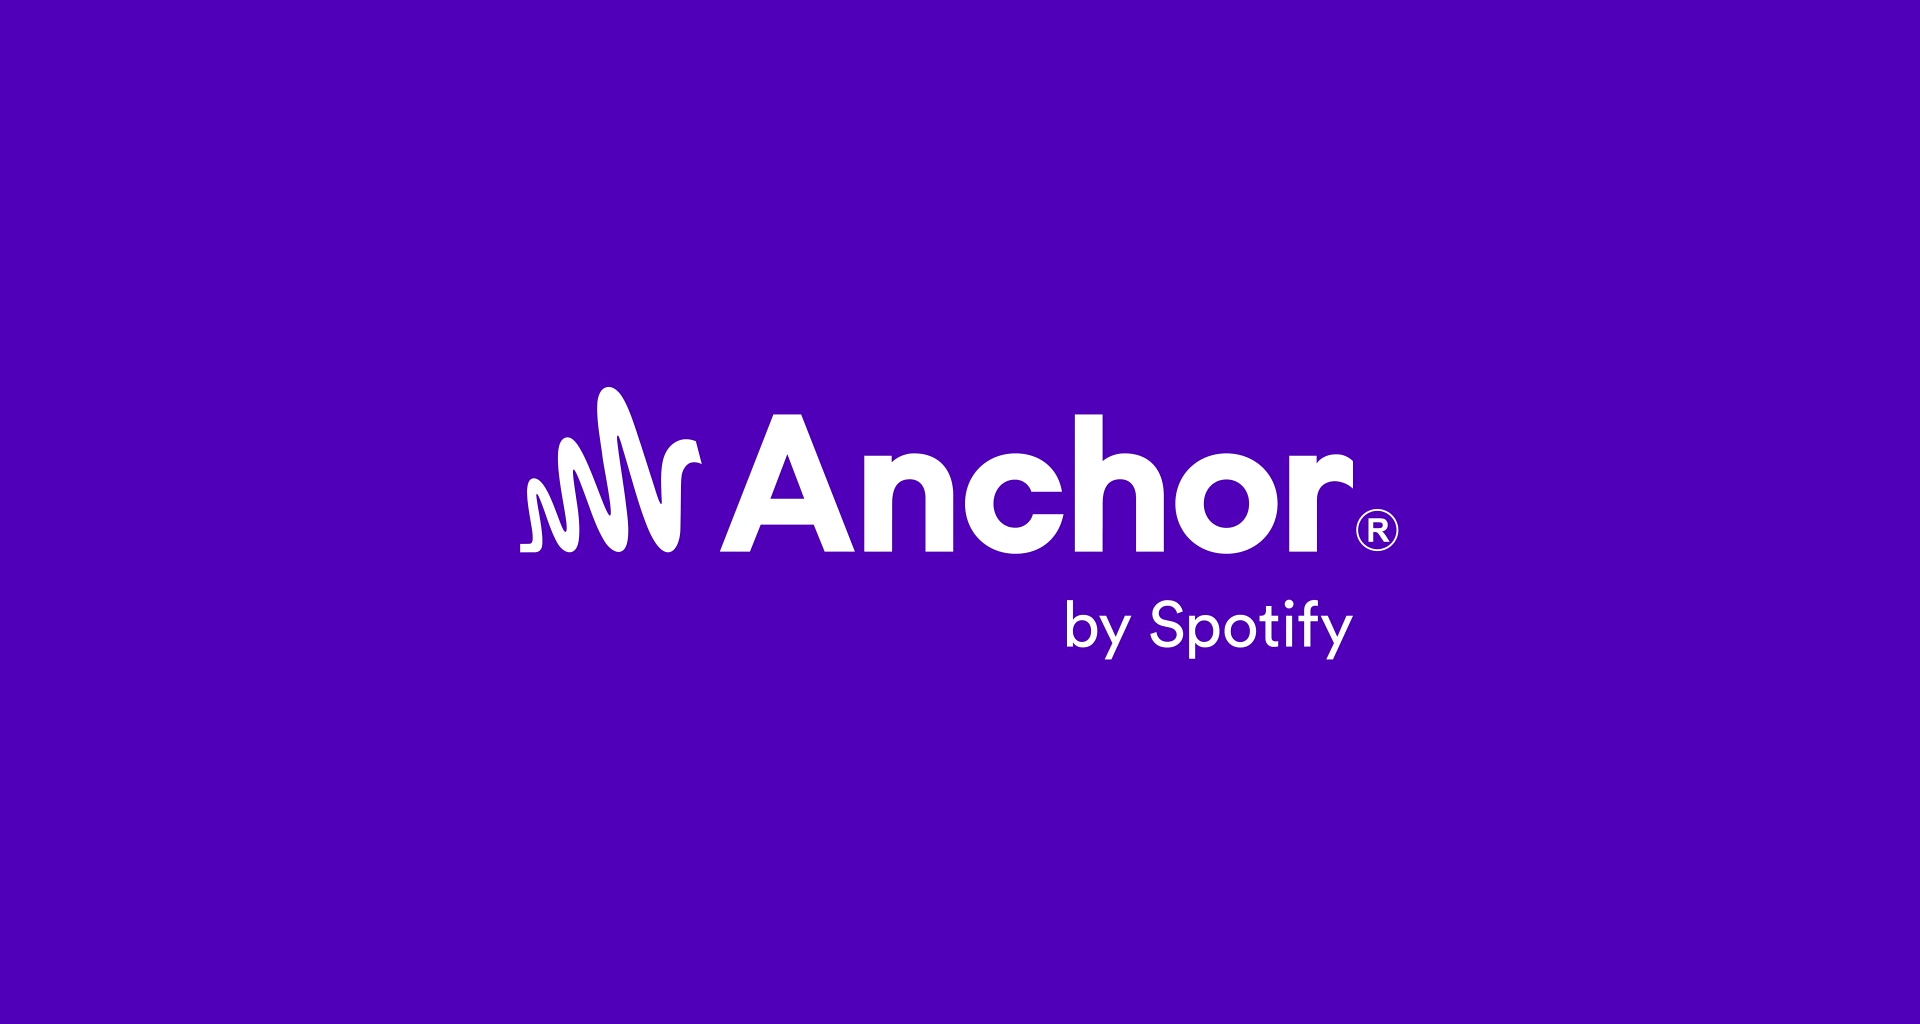 anchor podcast